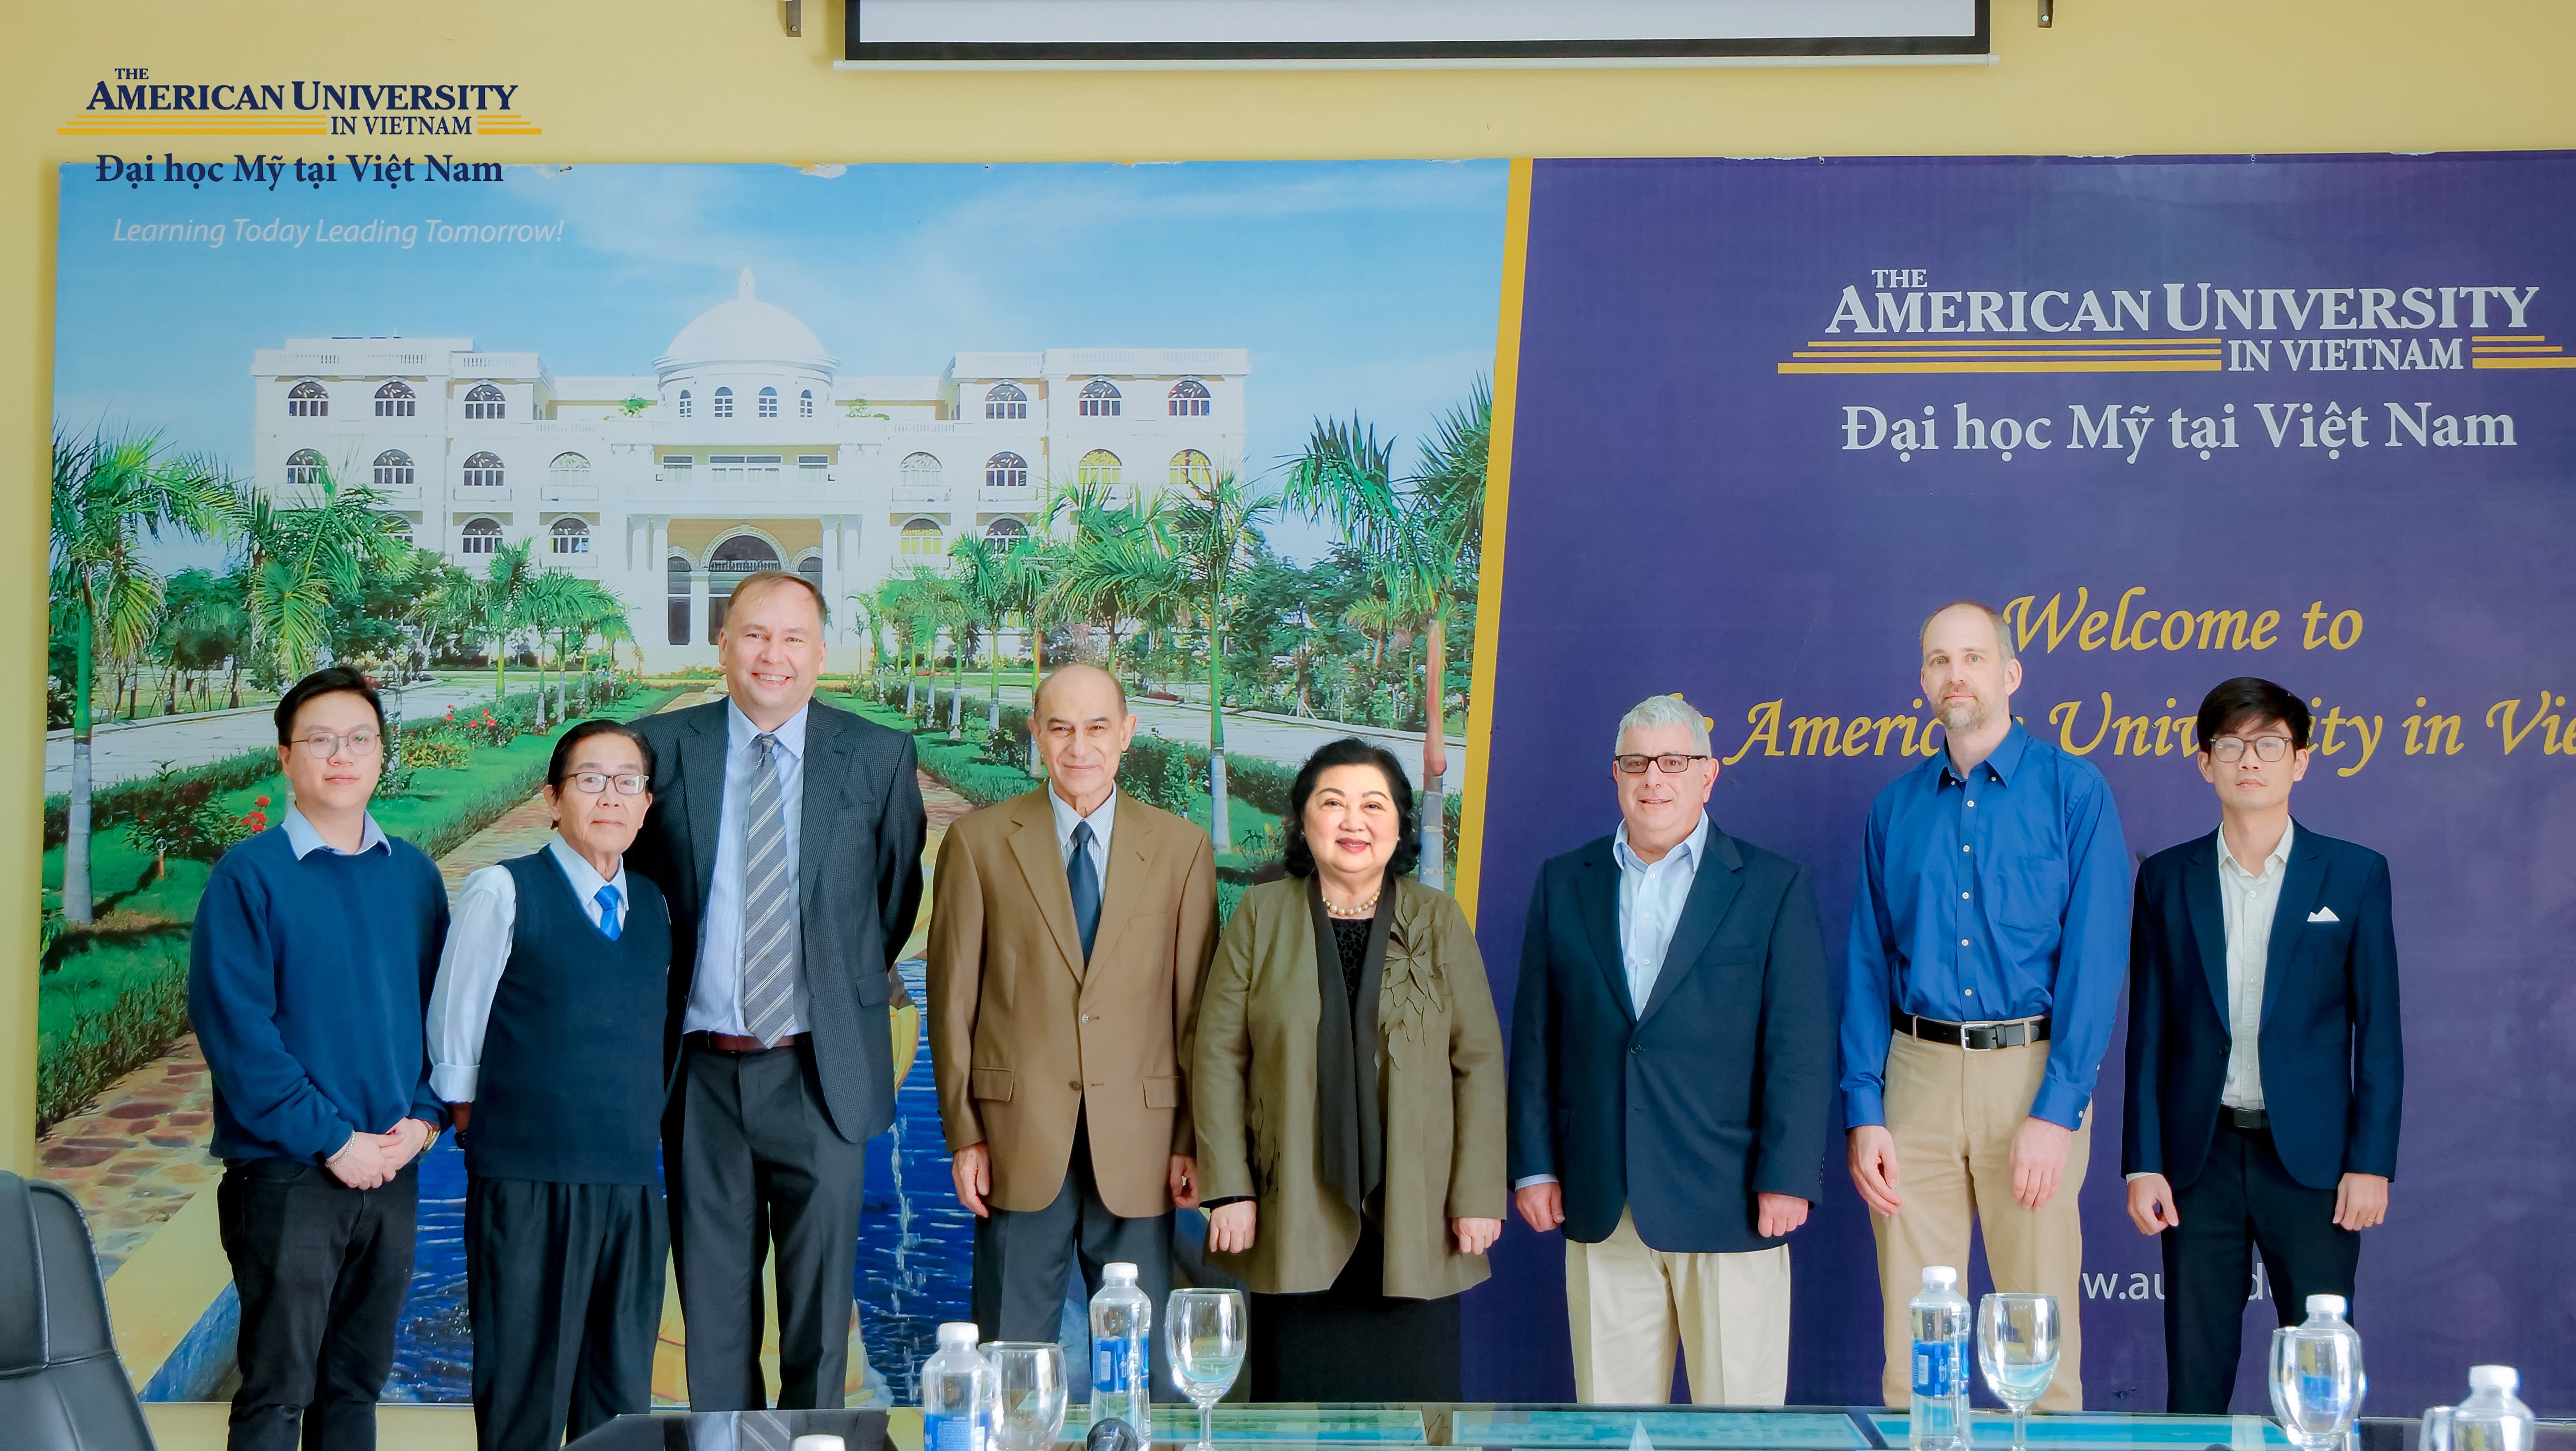 The American University In Viet Nam - Admission Open 2023 - 2027